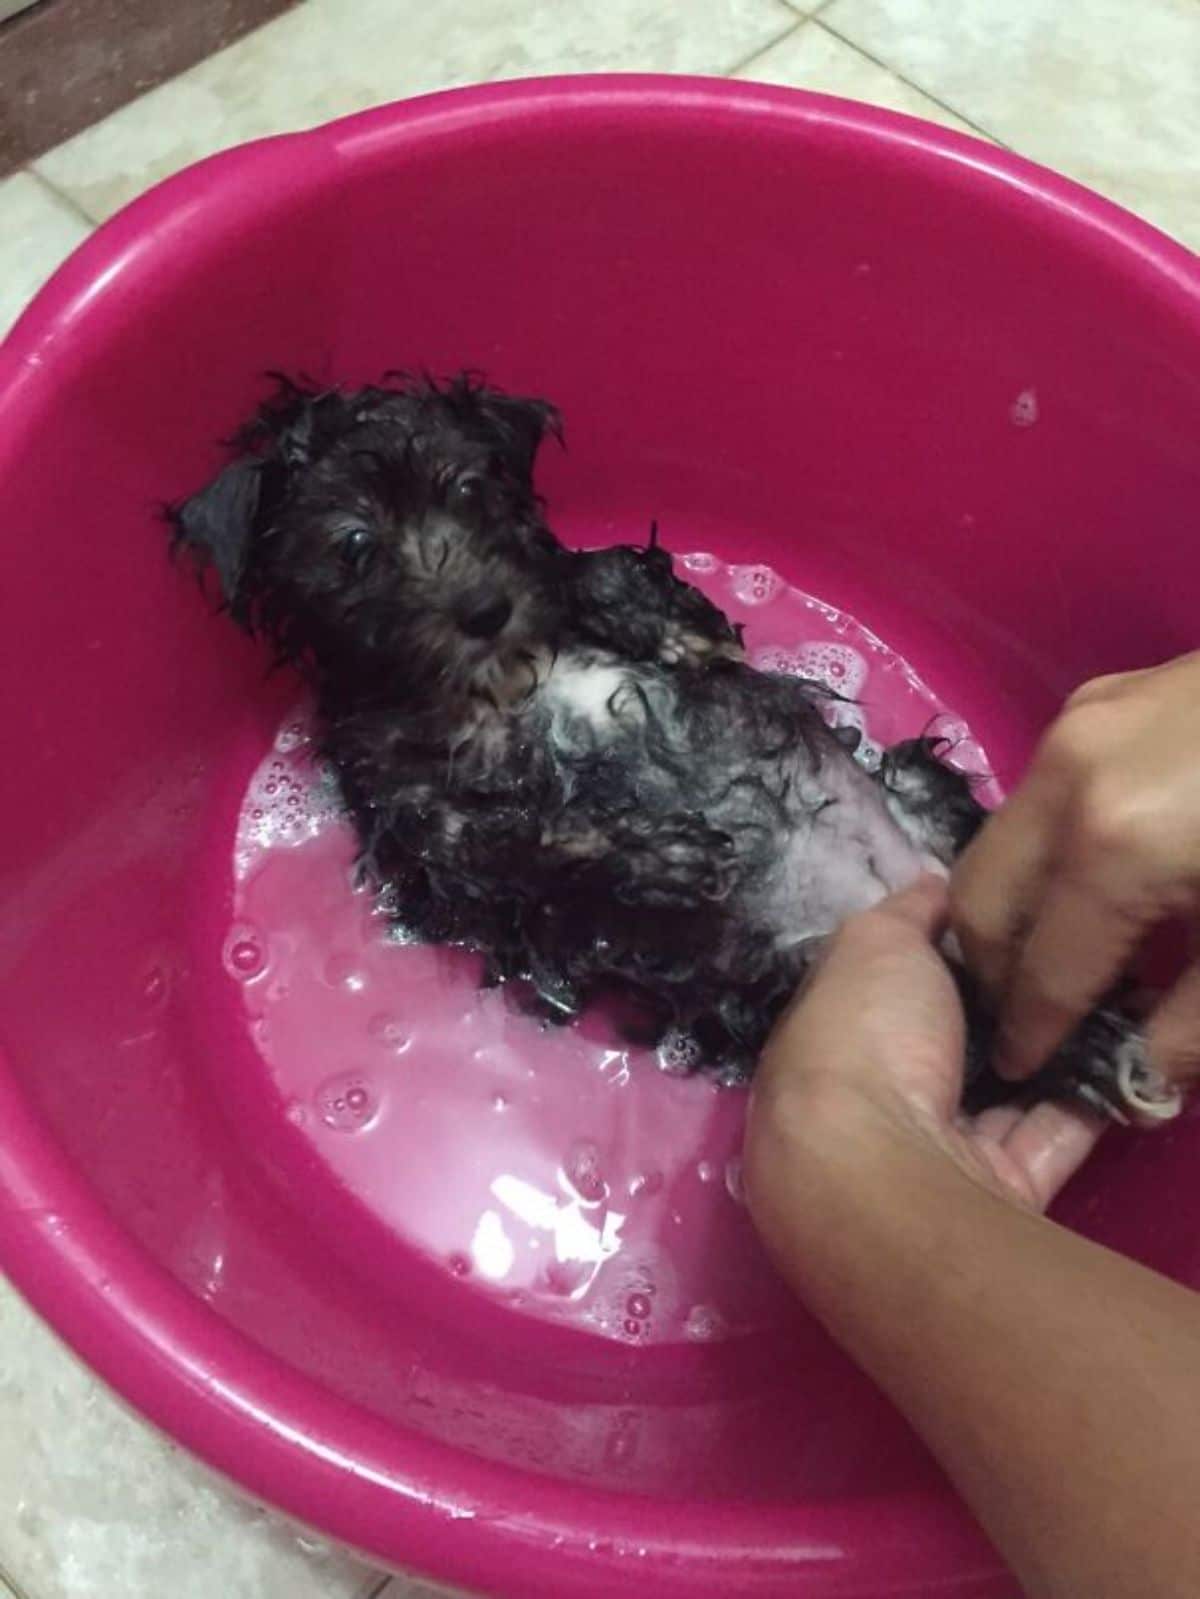 fluffy brown puppy laying belly up in a red basin with someone cleaning the puppy's back legs